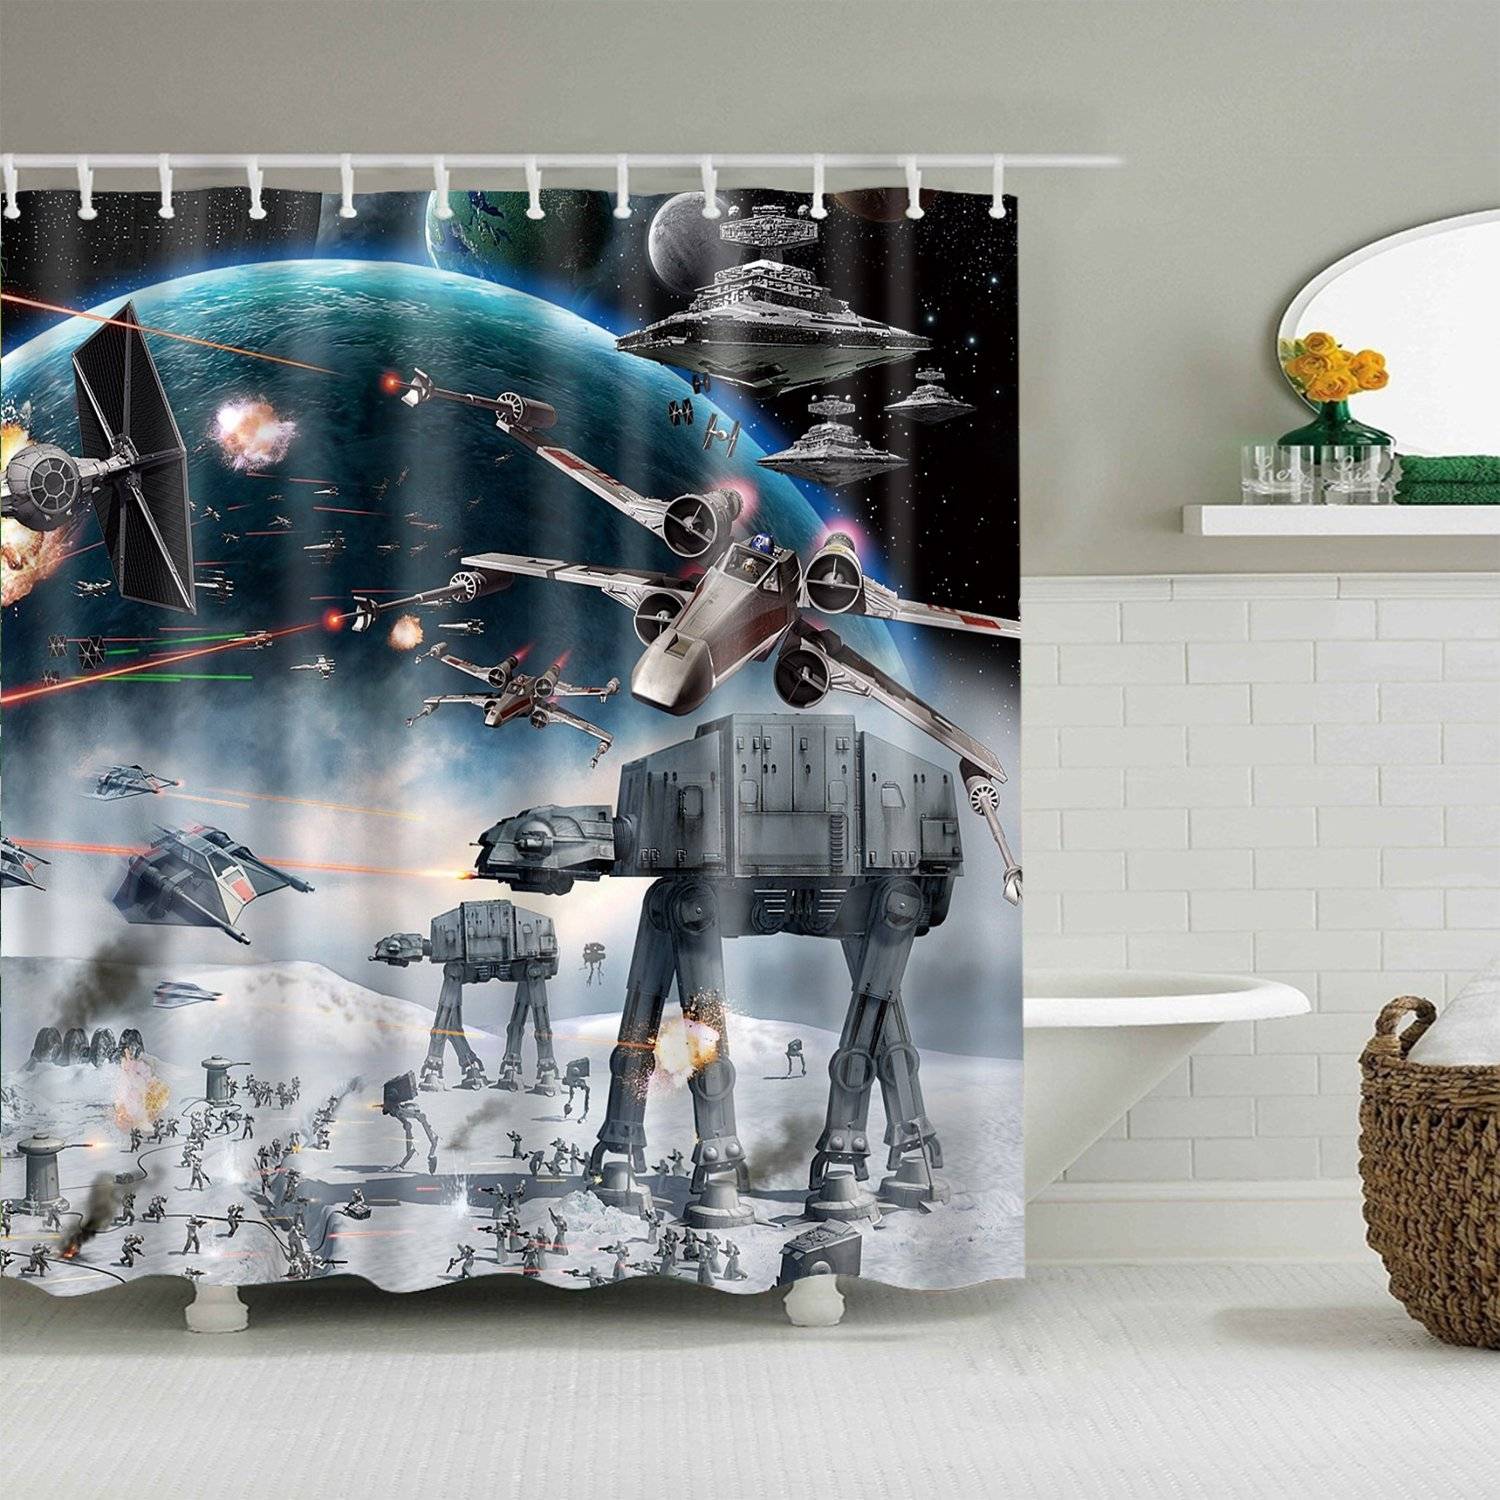 Awesome Star Wars Bathroom Accessories!